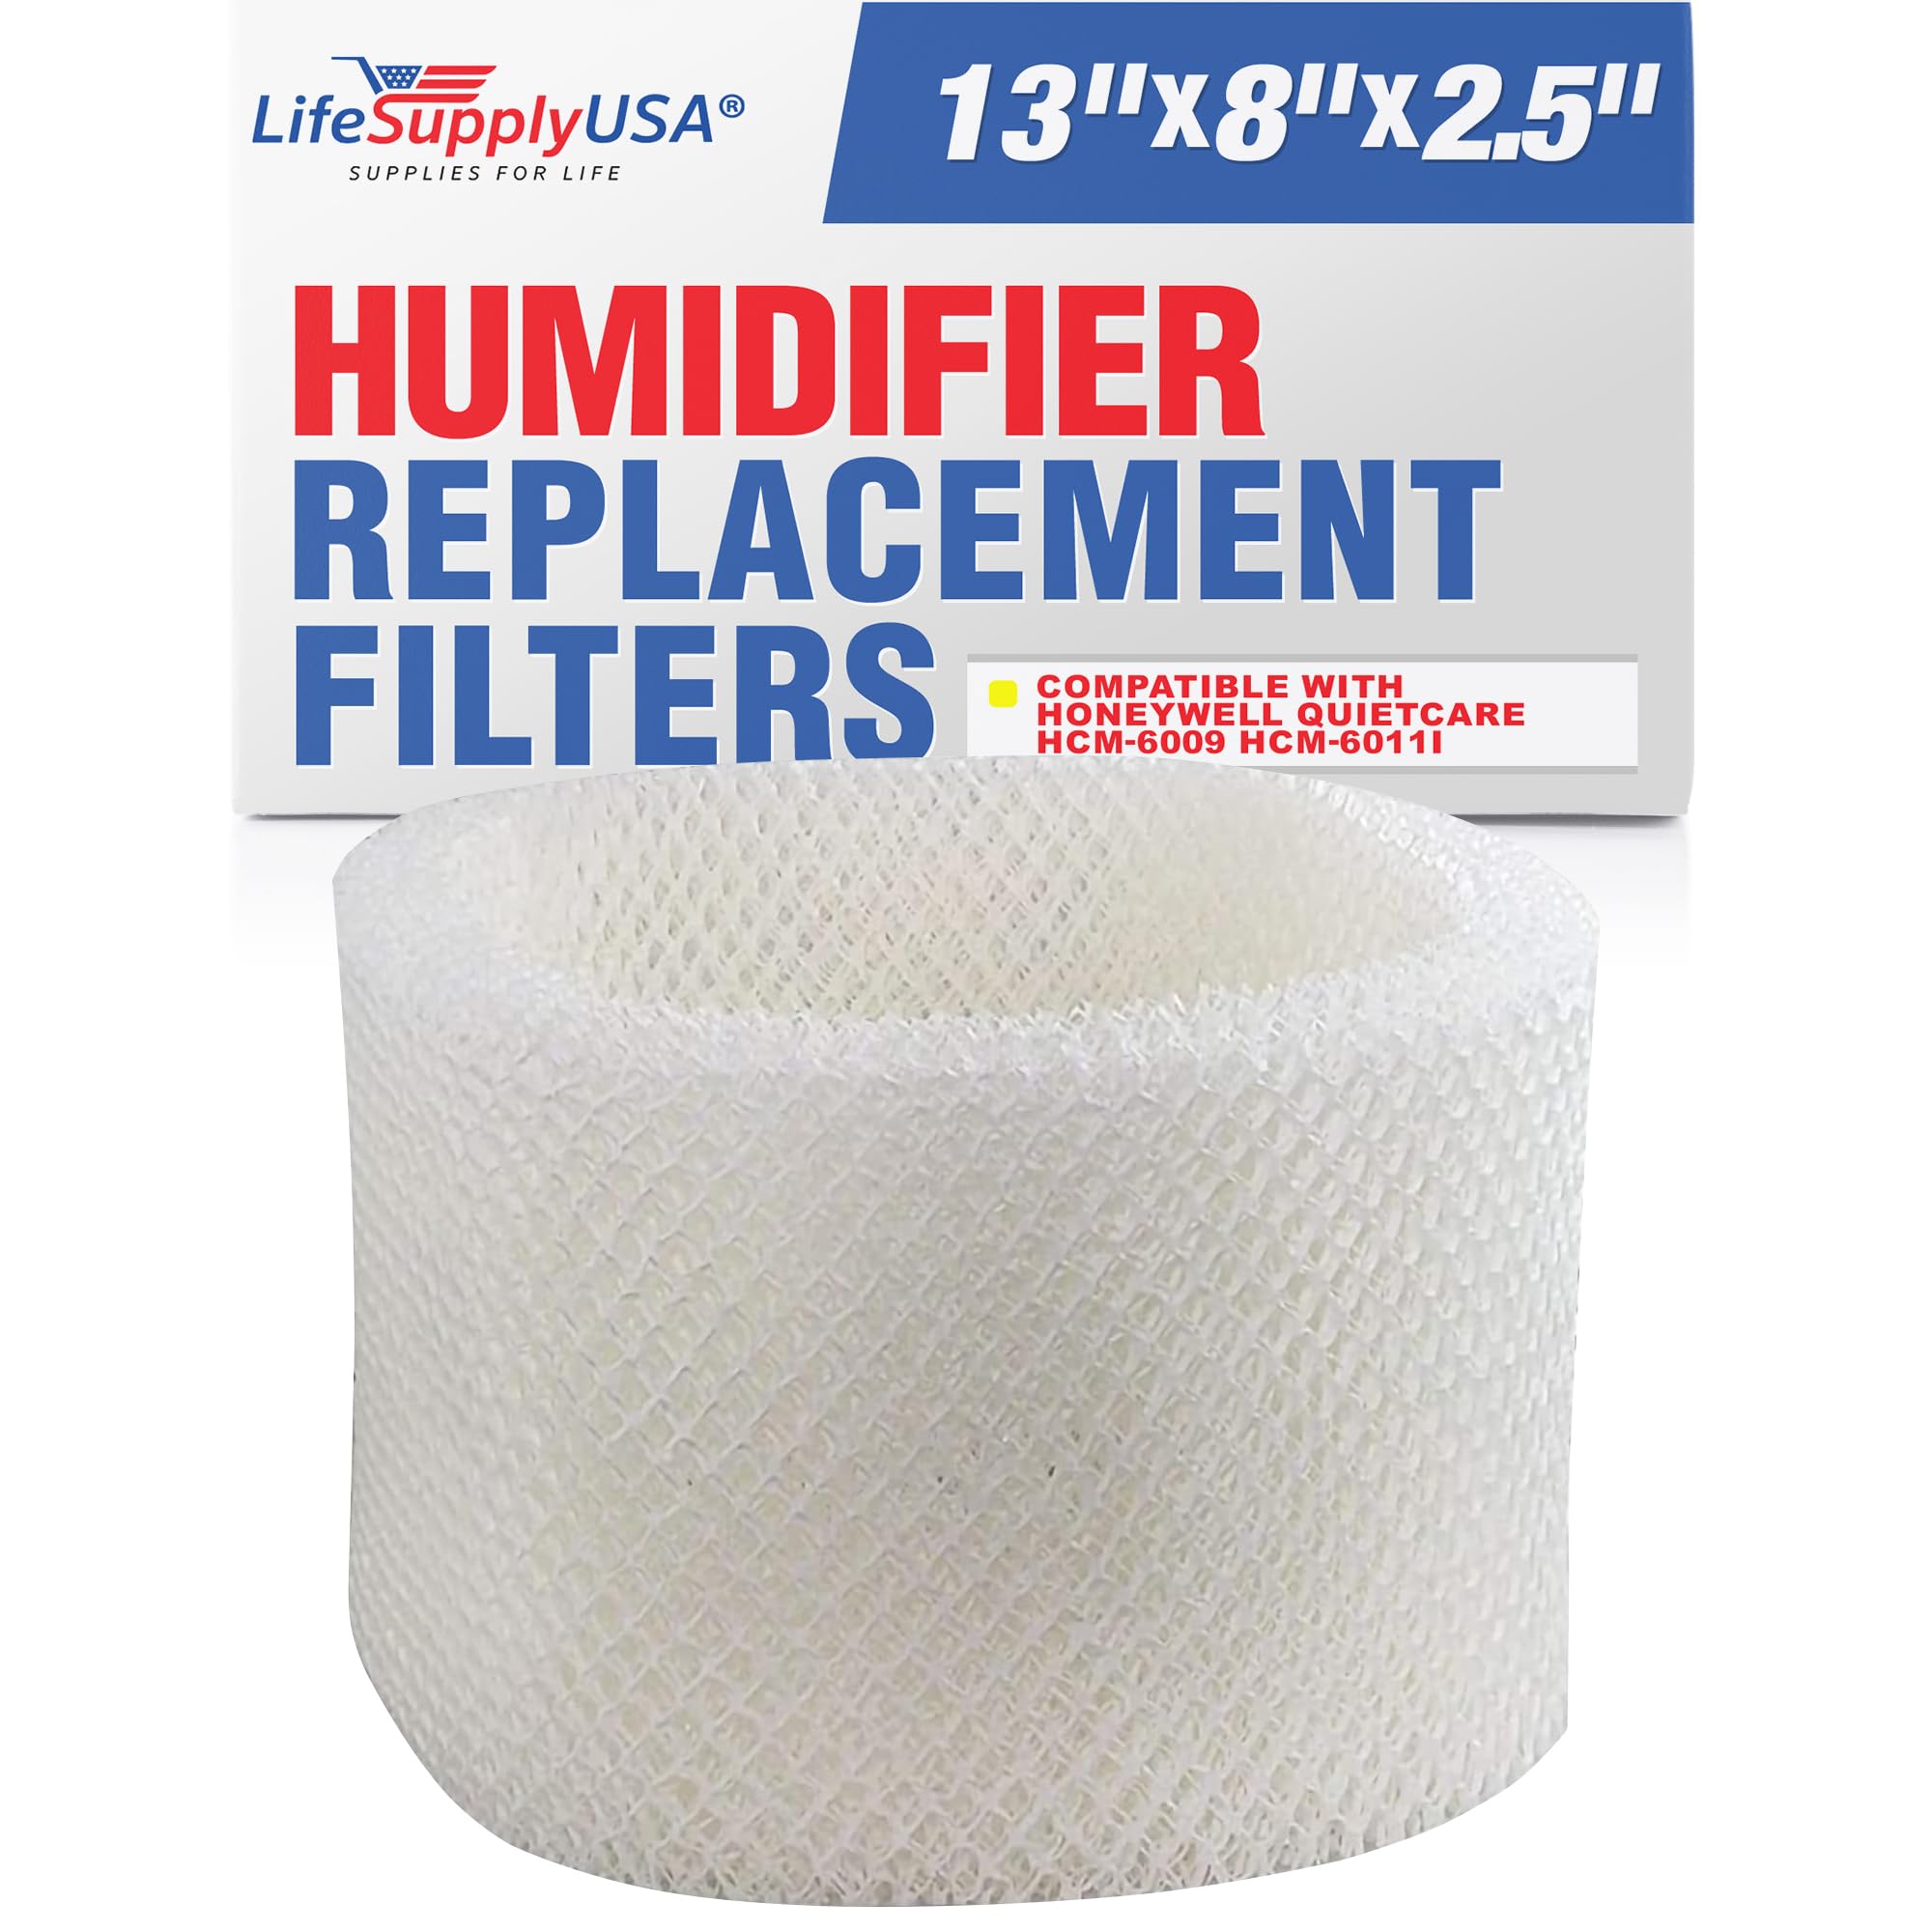 LifeSupplyUSA Humidifier Filter Replacement Wick Filter E Compatible with Honeywell Quietcare HCM-6009, HCM-6011i, HCM-6012i, HCM-6013i, HC-14, HW-14